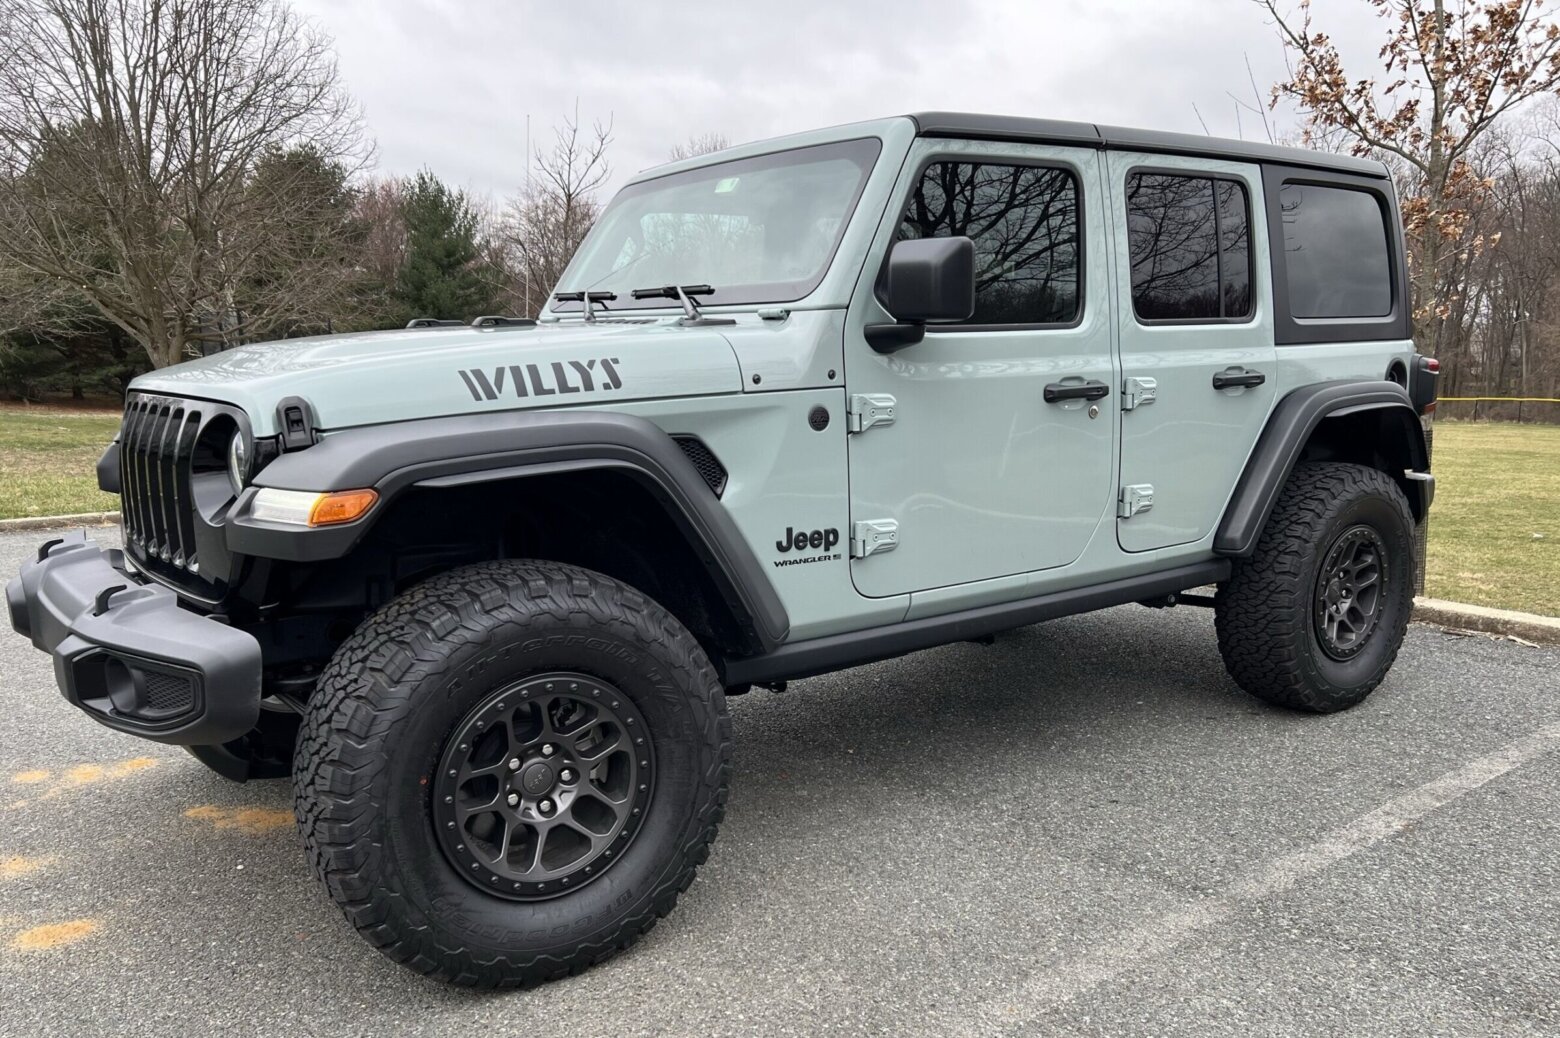 2021 Jeep Wrangler Willys Review: Can You Daily A JL Wrangler? 